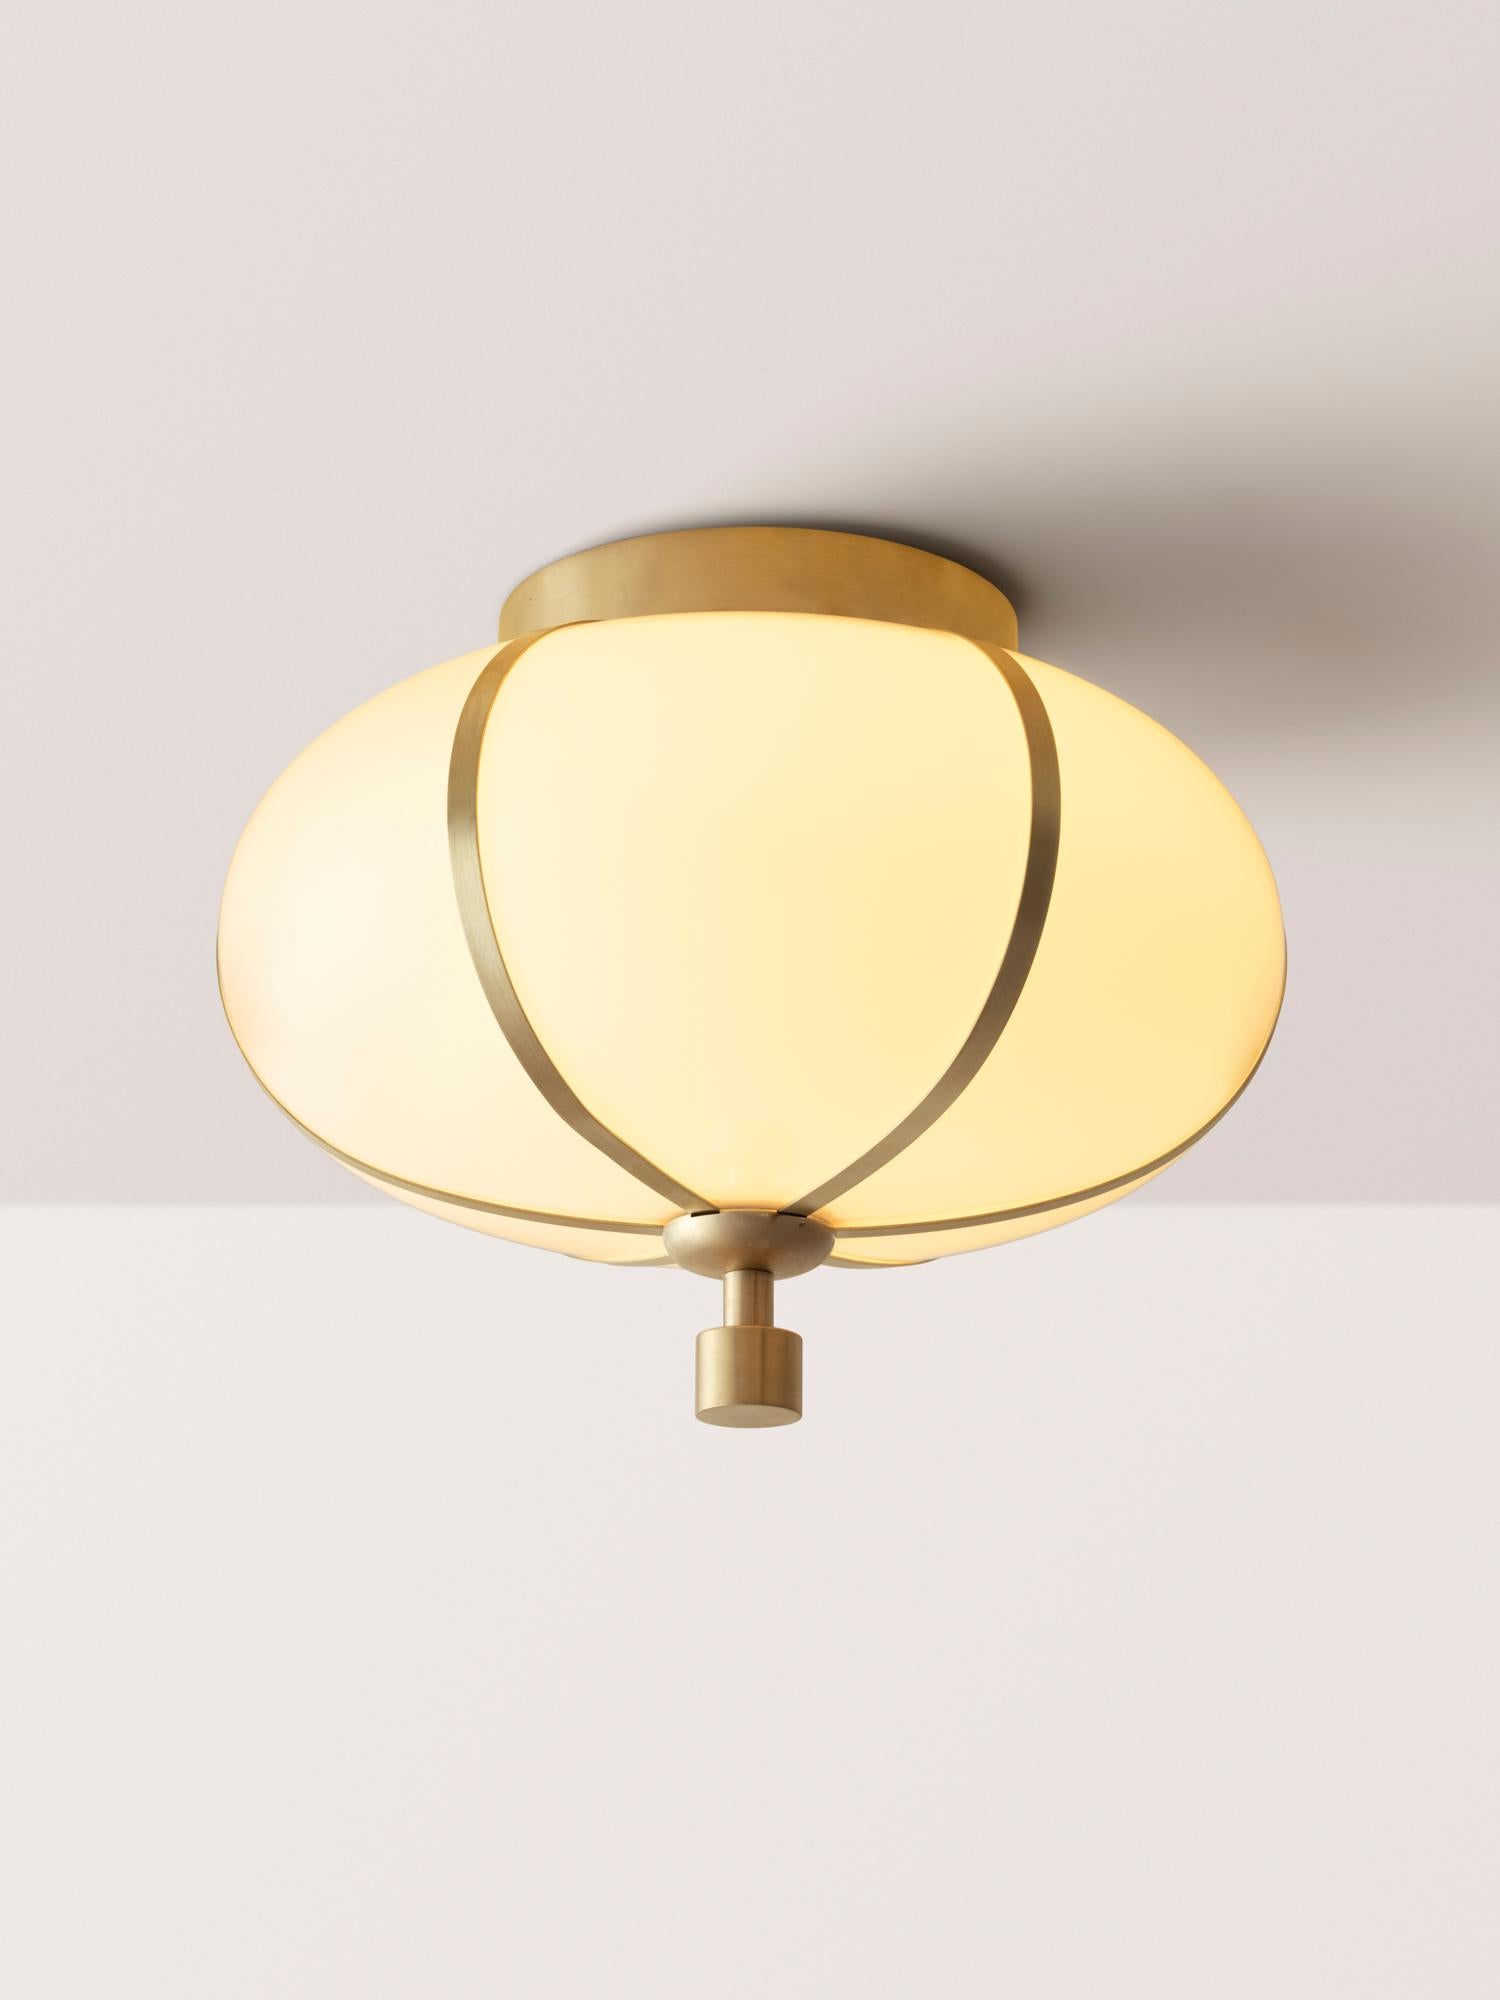 The Rib Flush Mount - Small Ellipse is blown in Italy and delicately framed by thin brass ribs. A cylindrical brass finial, with optional hand-wrapped leather or suede, elongates the fixture and adds a finishing touch of refinement.

This listing is